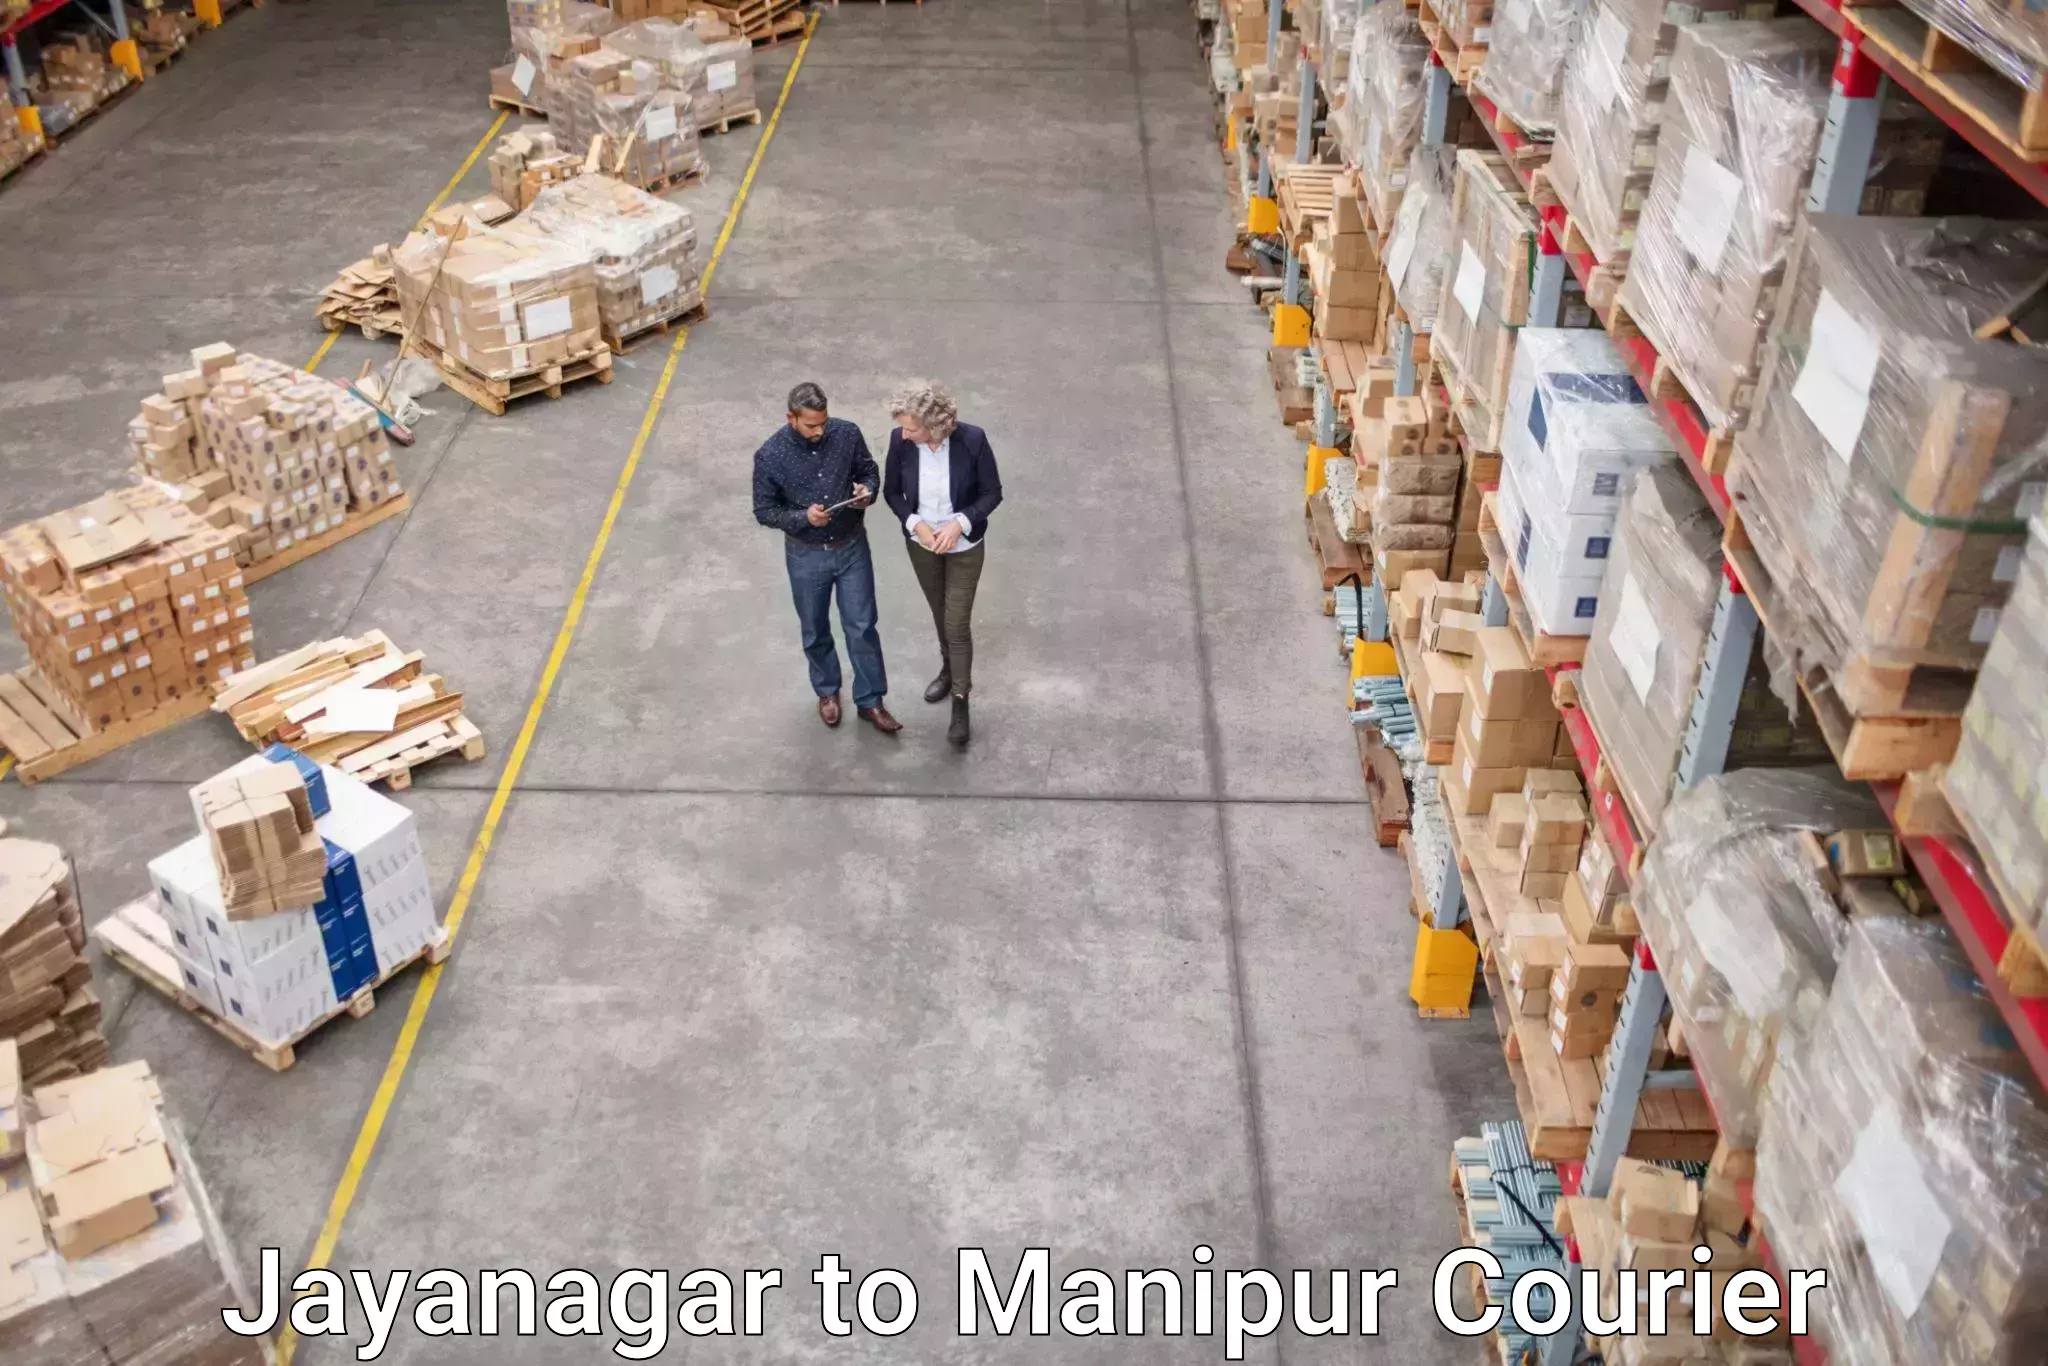 Quality courier partnerships Jayanagar to Kakching